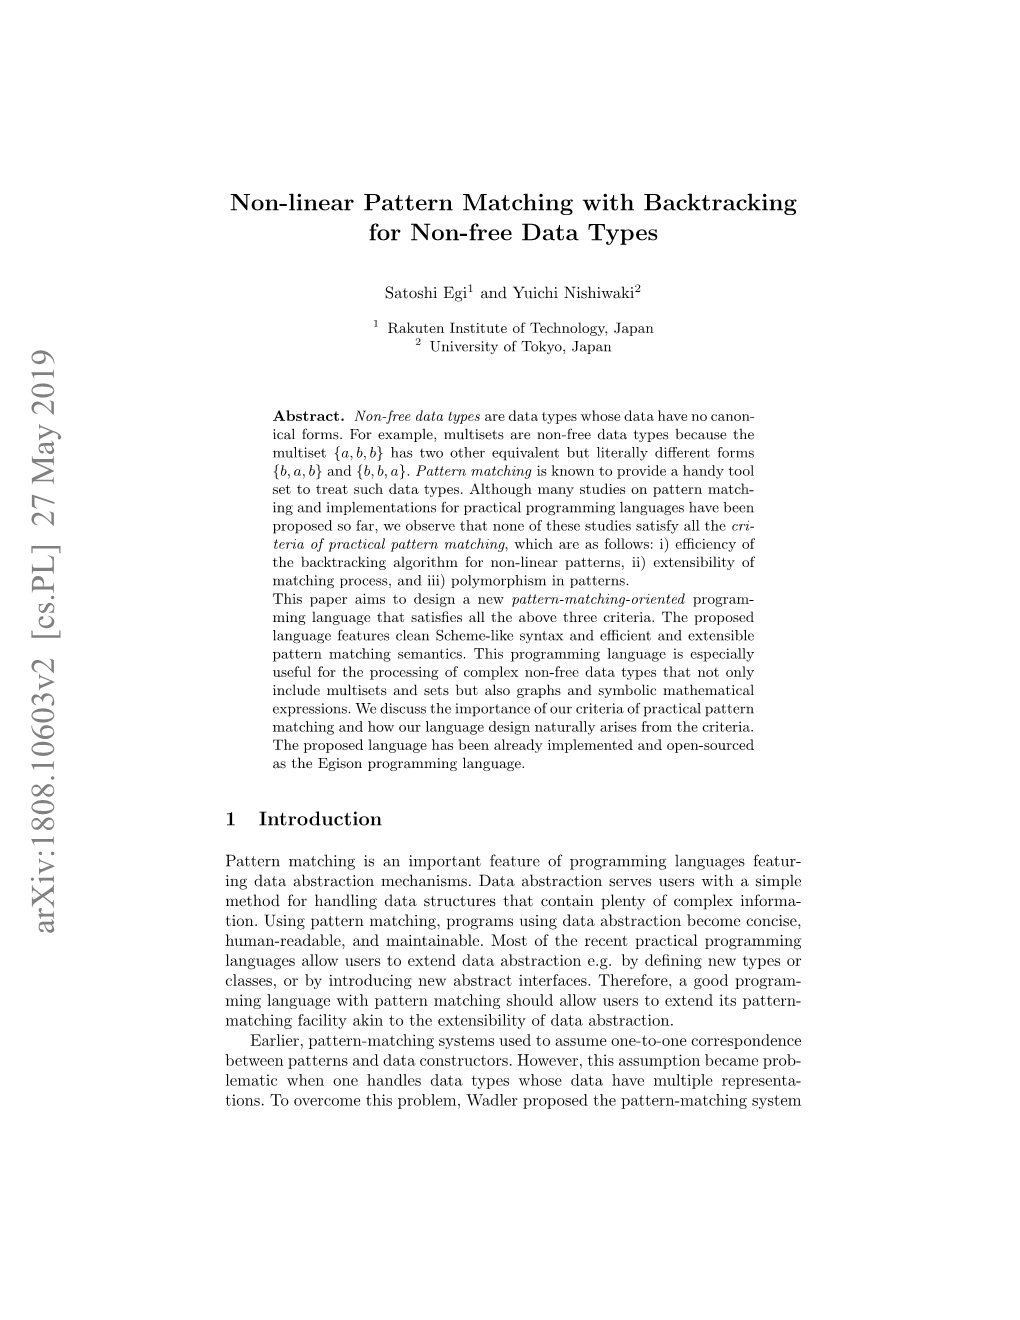 Non-Linear Pattern Matching with Backtracking for Non-Free Data Types